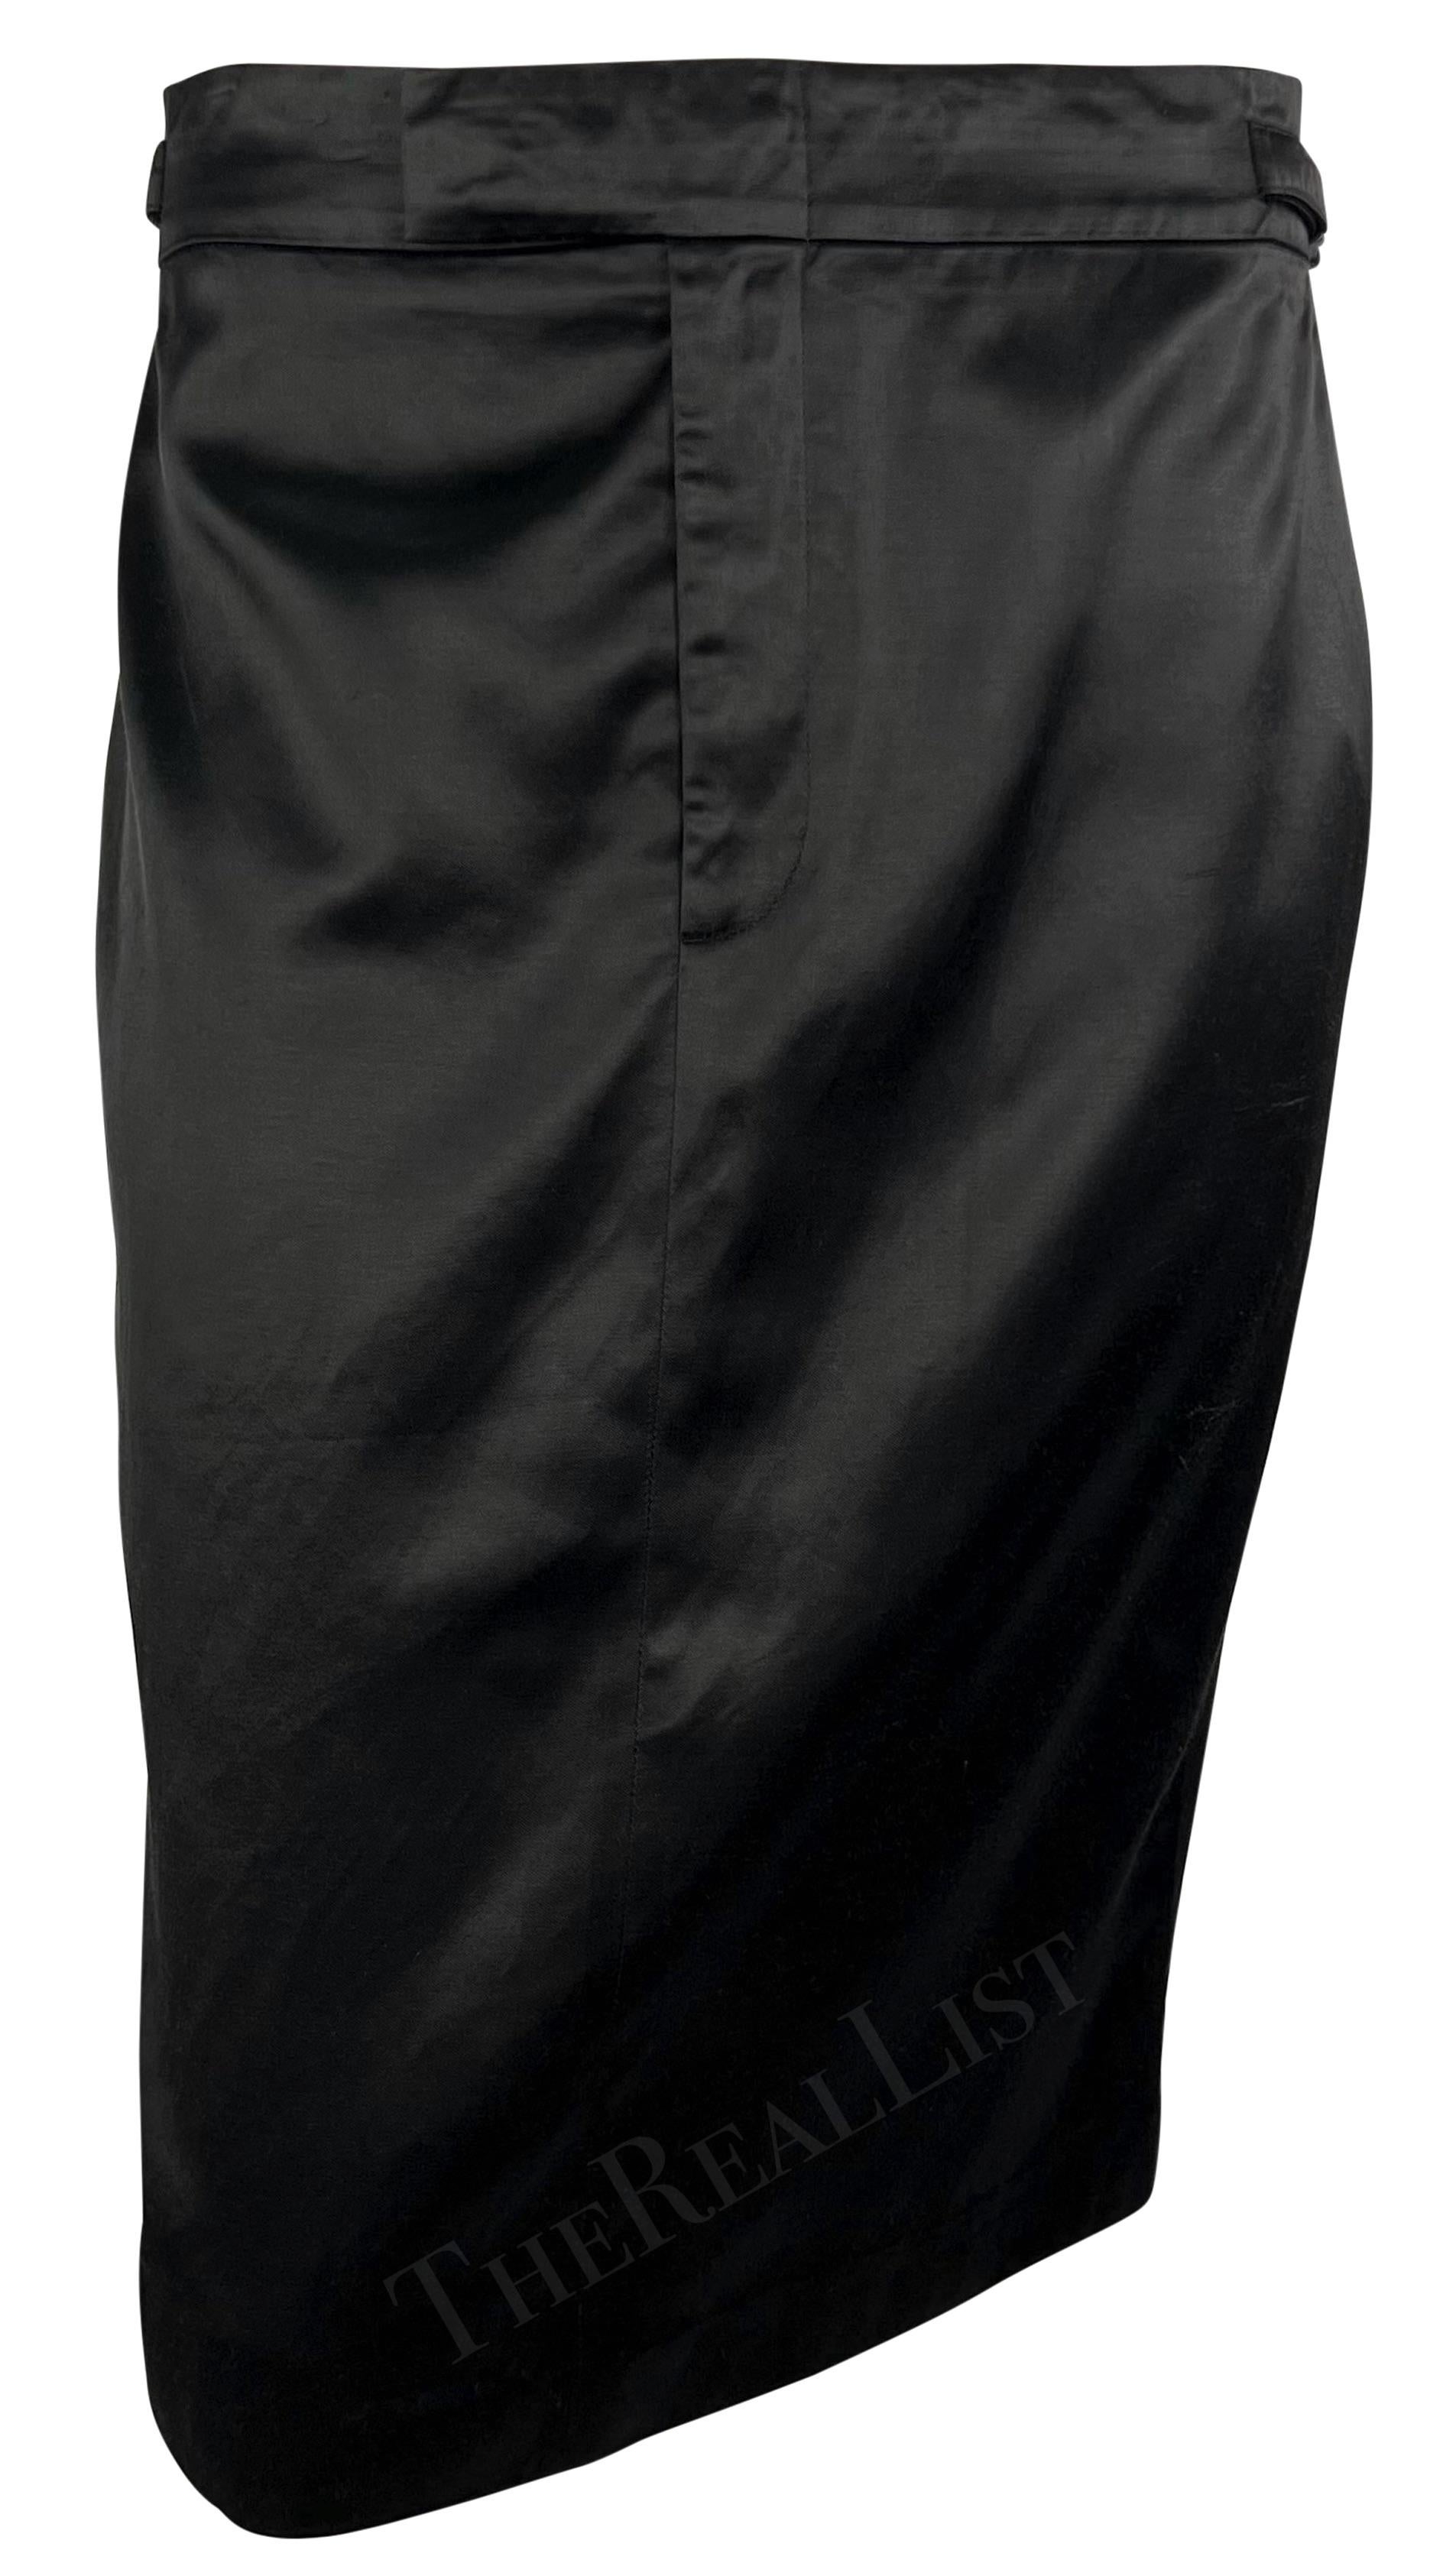 S/S 2001 Gucci by Tom Ford Black Satin Belted Runway Pencil Skirt  For Sale 4